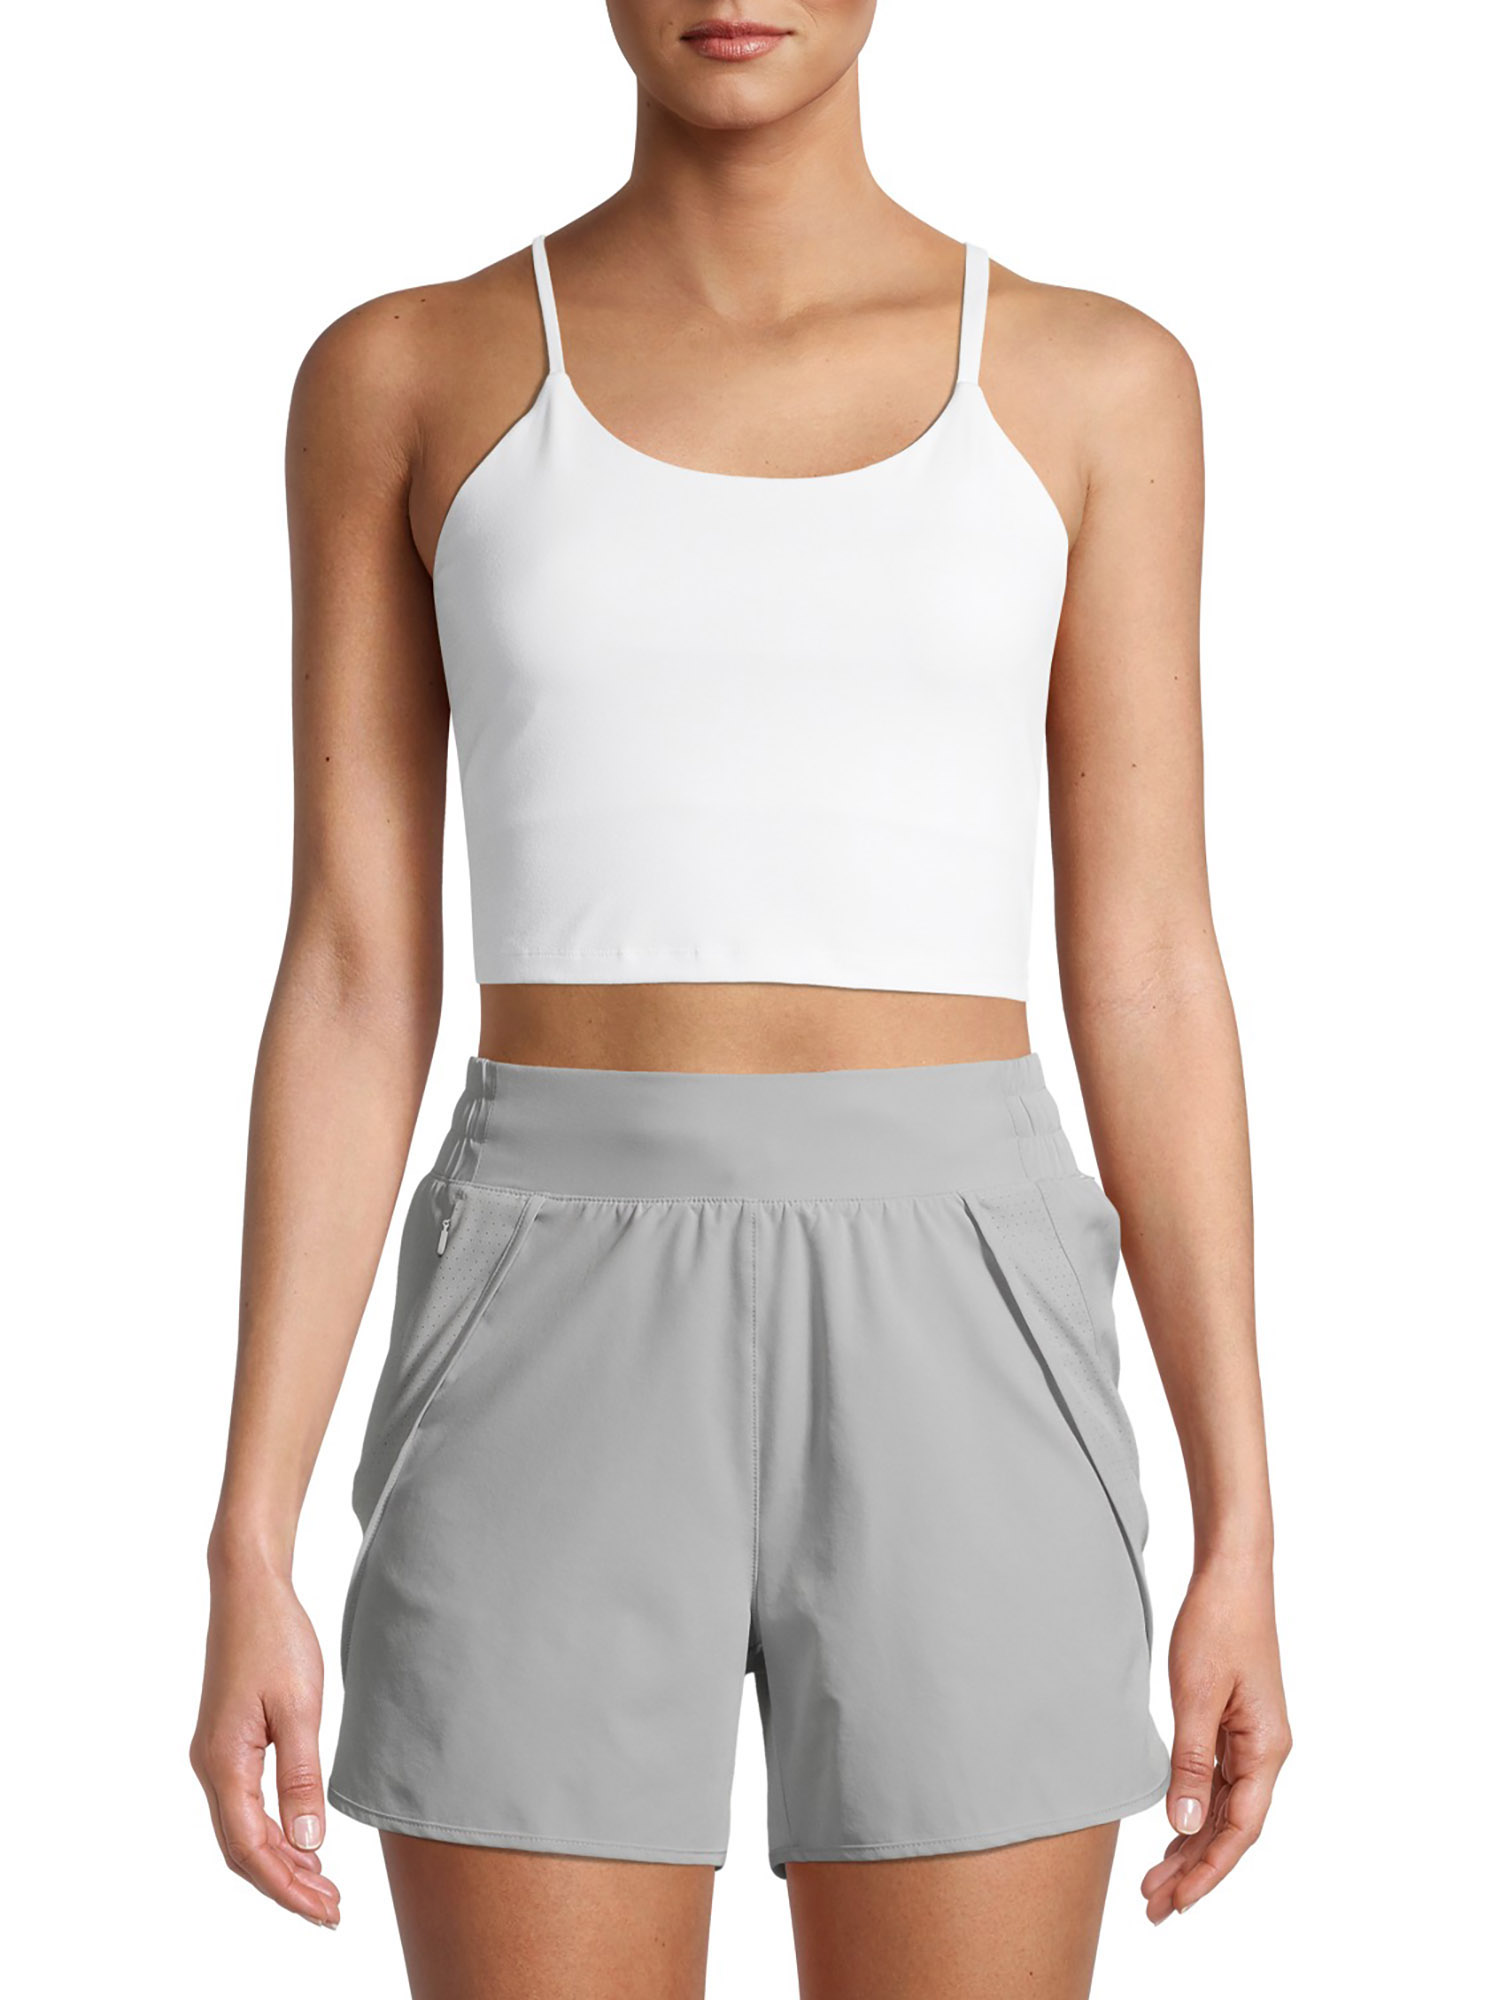 Avia Low Impact Sports Crop with Shelf Bra and Removable Pads - image 1 of 7